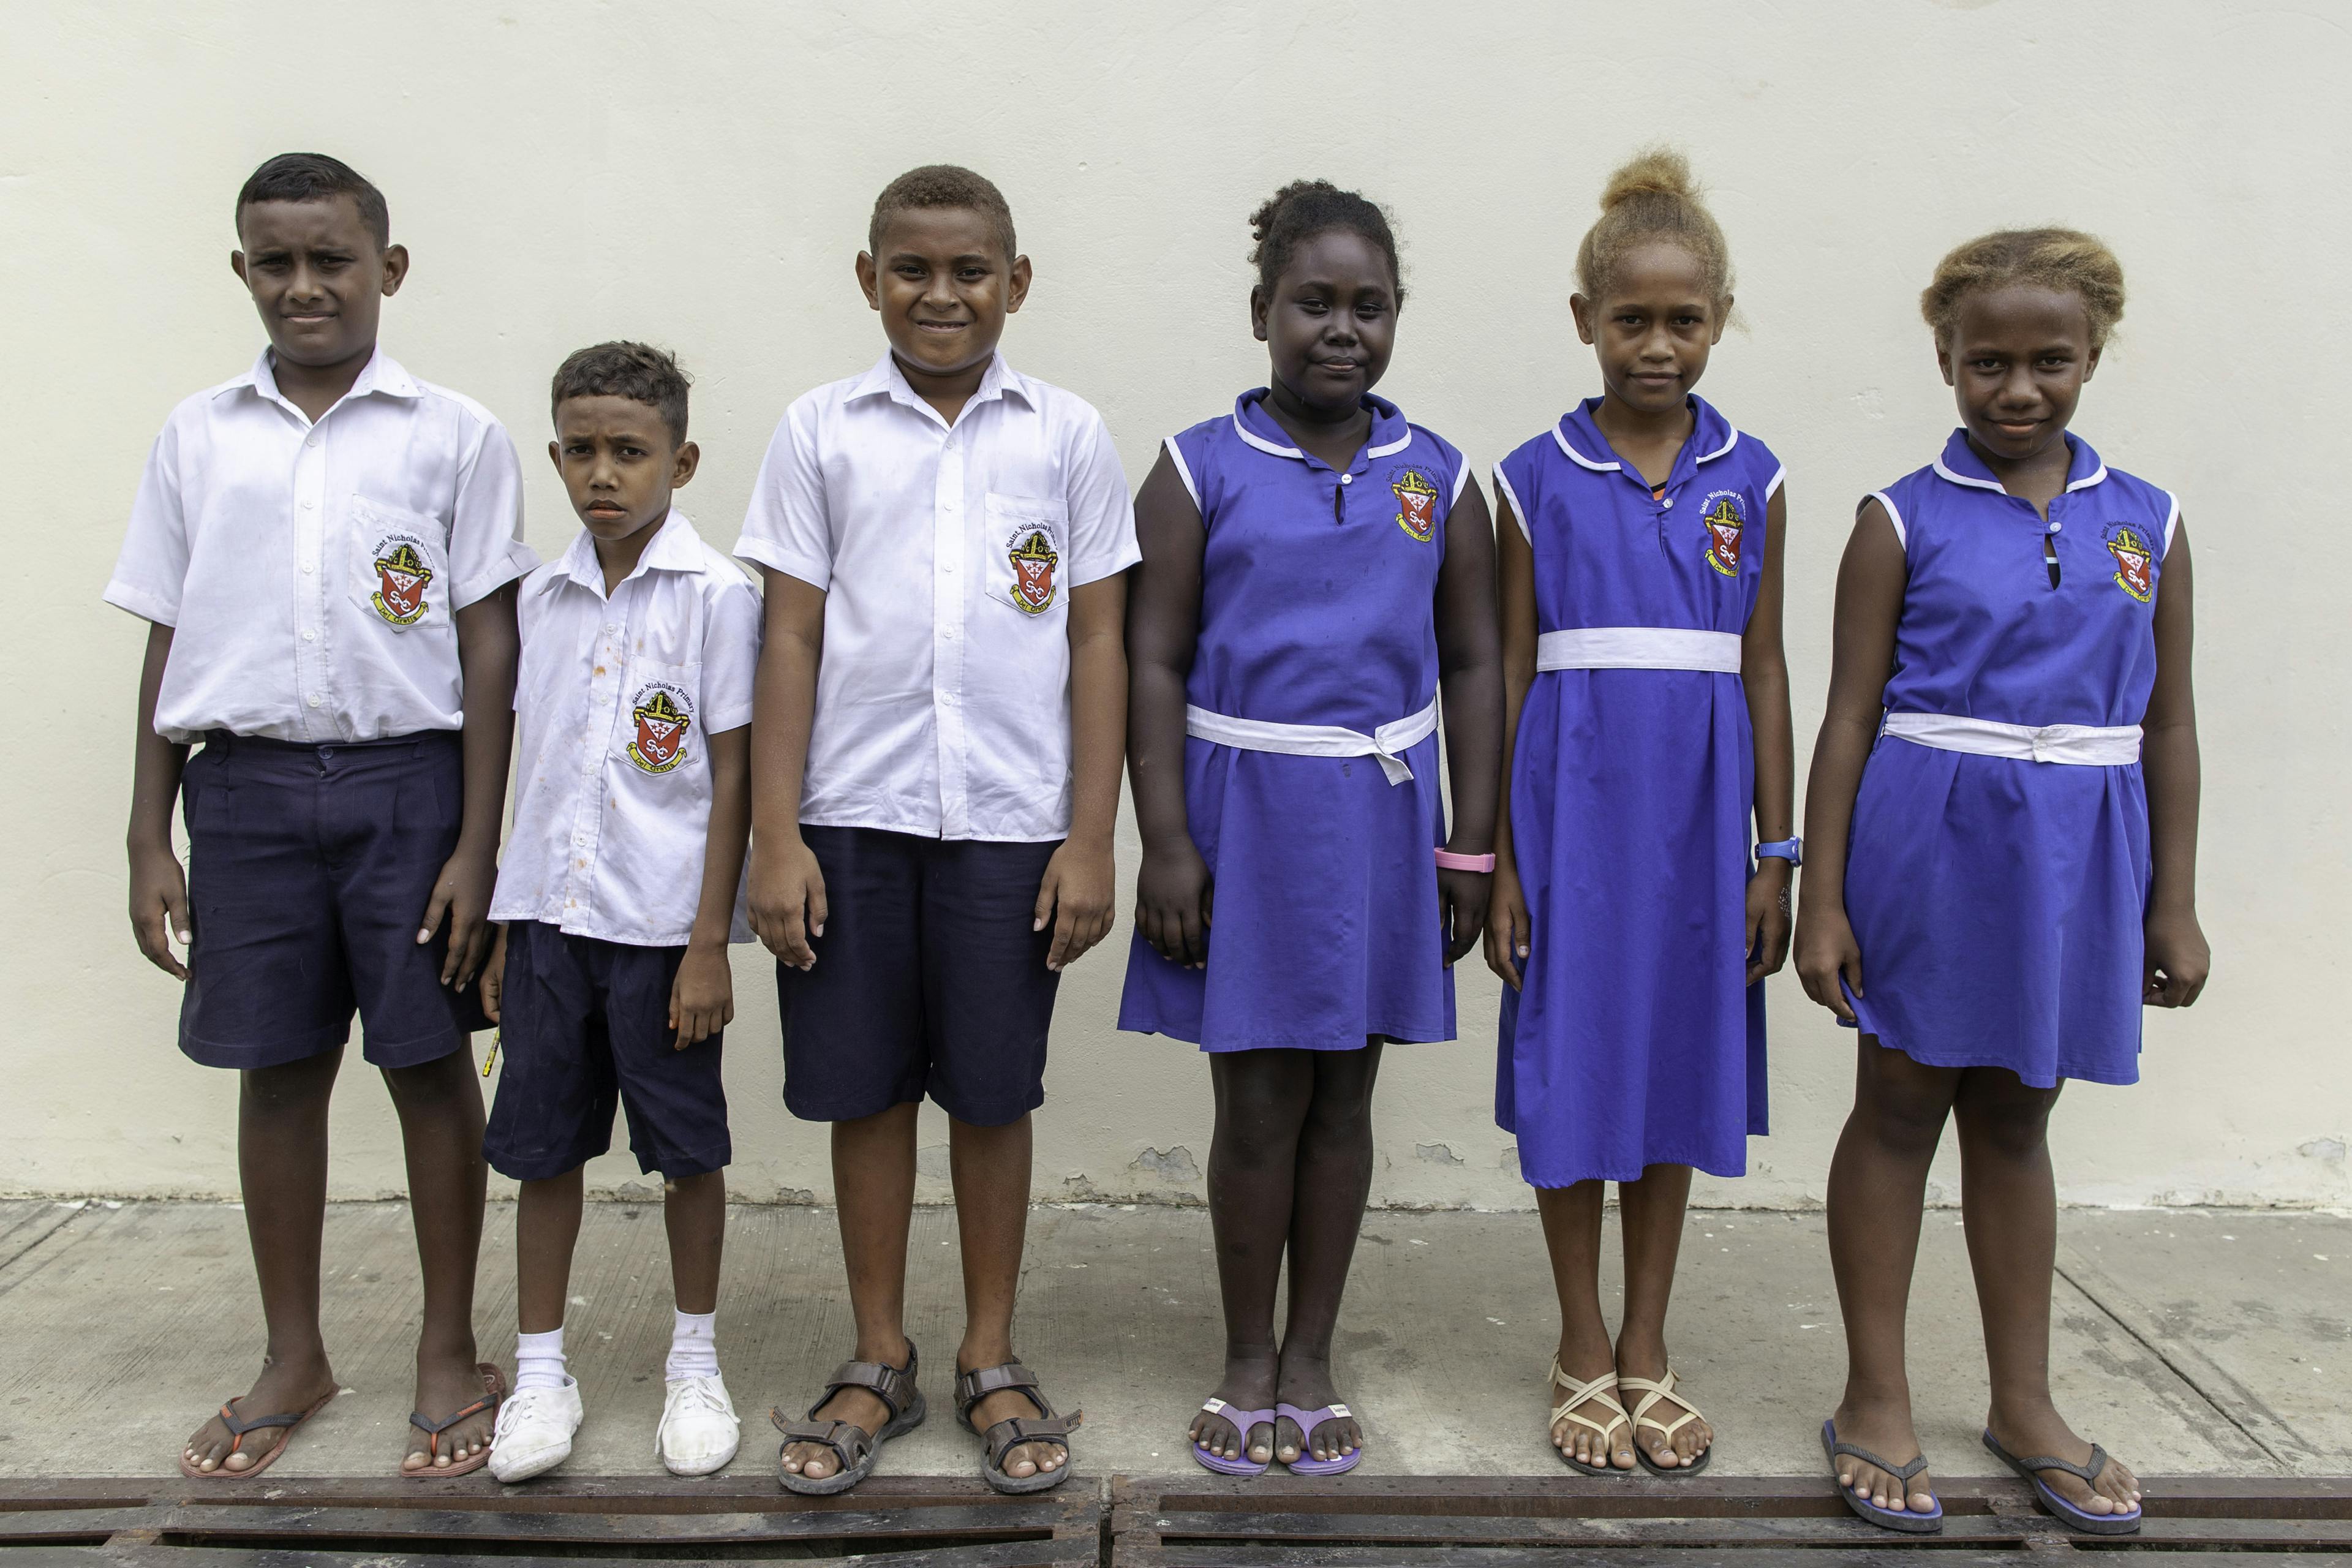 On 26 August, 2019, (second from left) 9 Nino Devesi (9) stands with classmates of the same age in Guadalcanal, Solomon Islands.